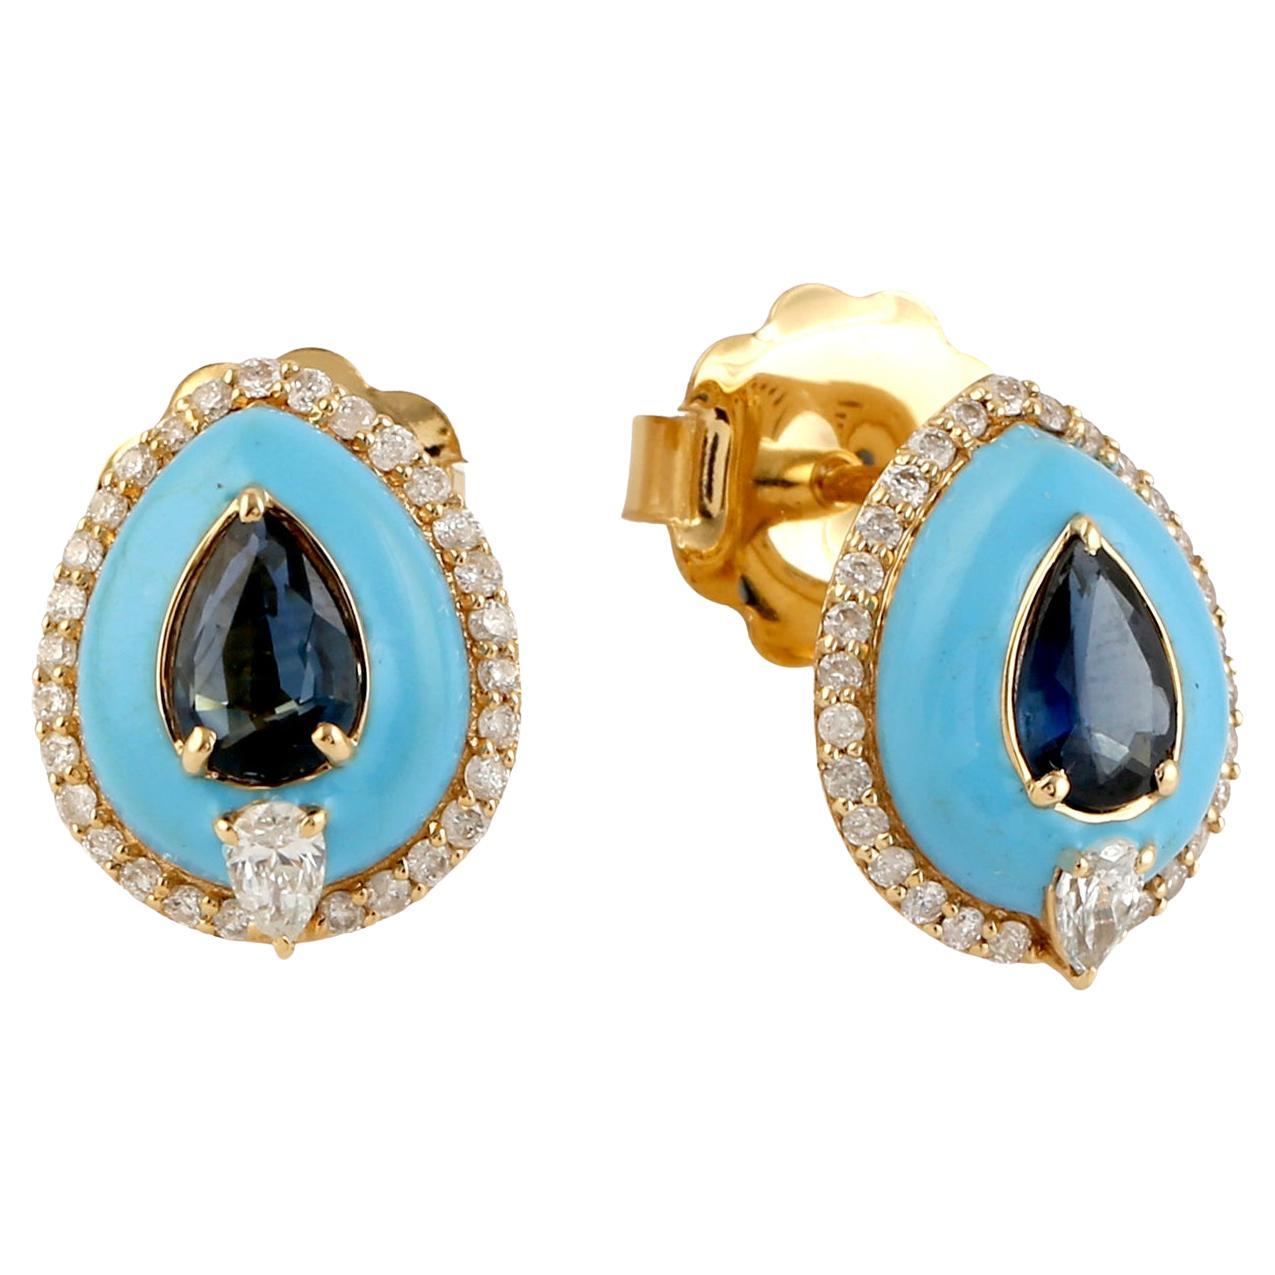 Pear Shaped Blue Sapphire & Enamel Studs With Diamonds Made In 18K Yellow Gold For Sale